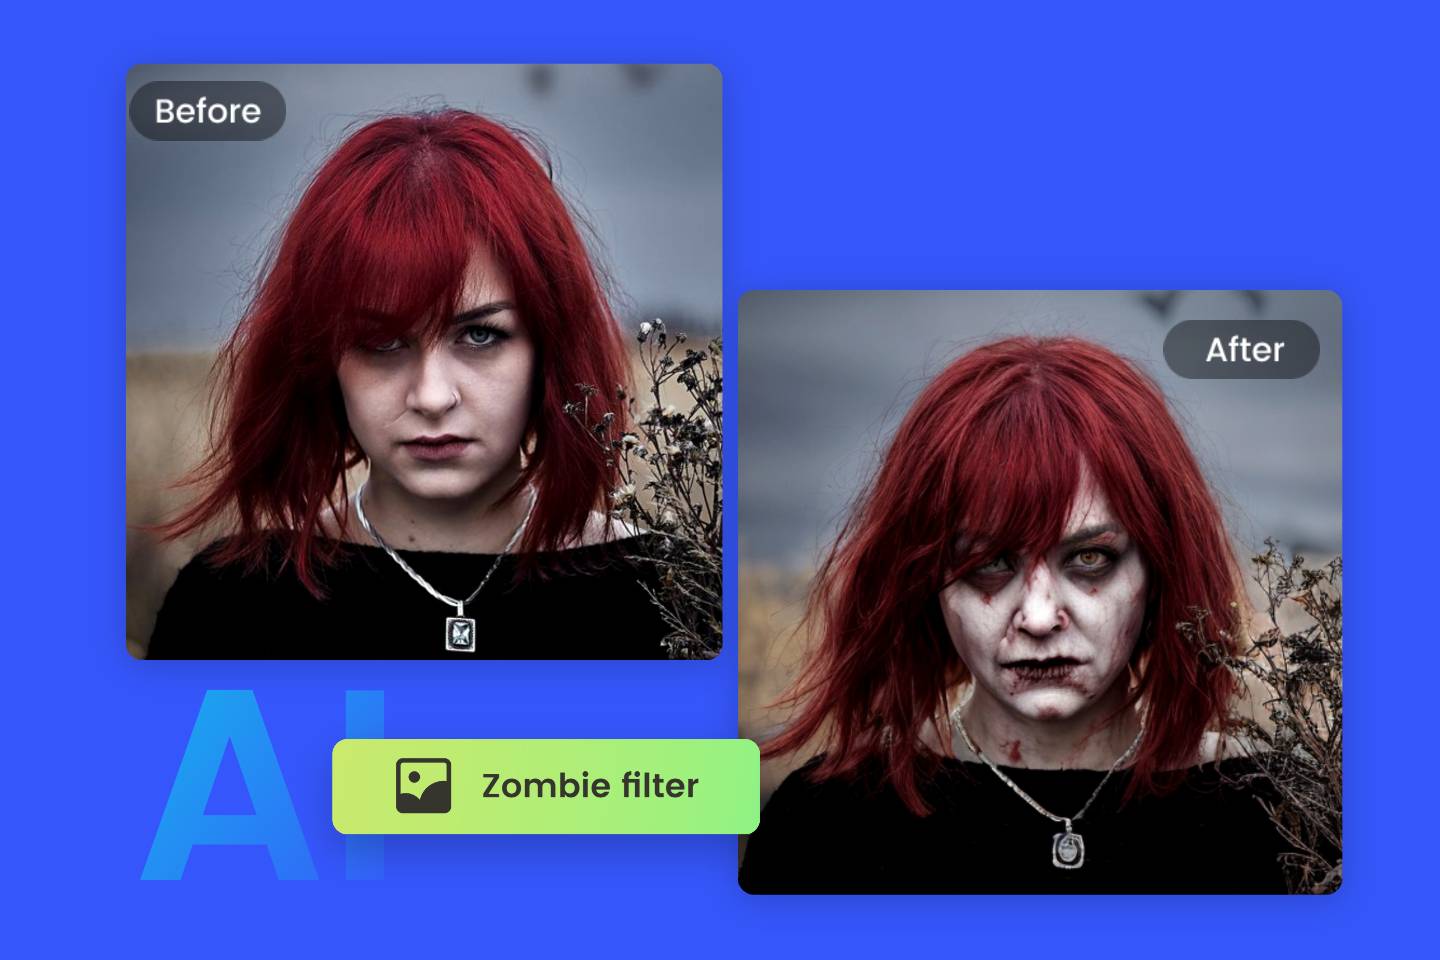 A comparison of a redhead girl using a zombie filter